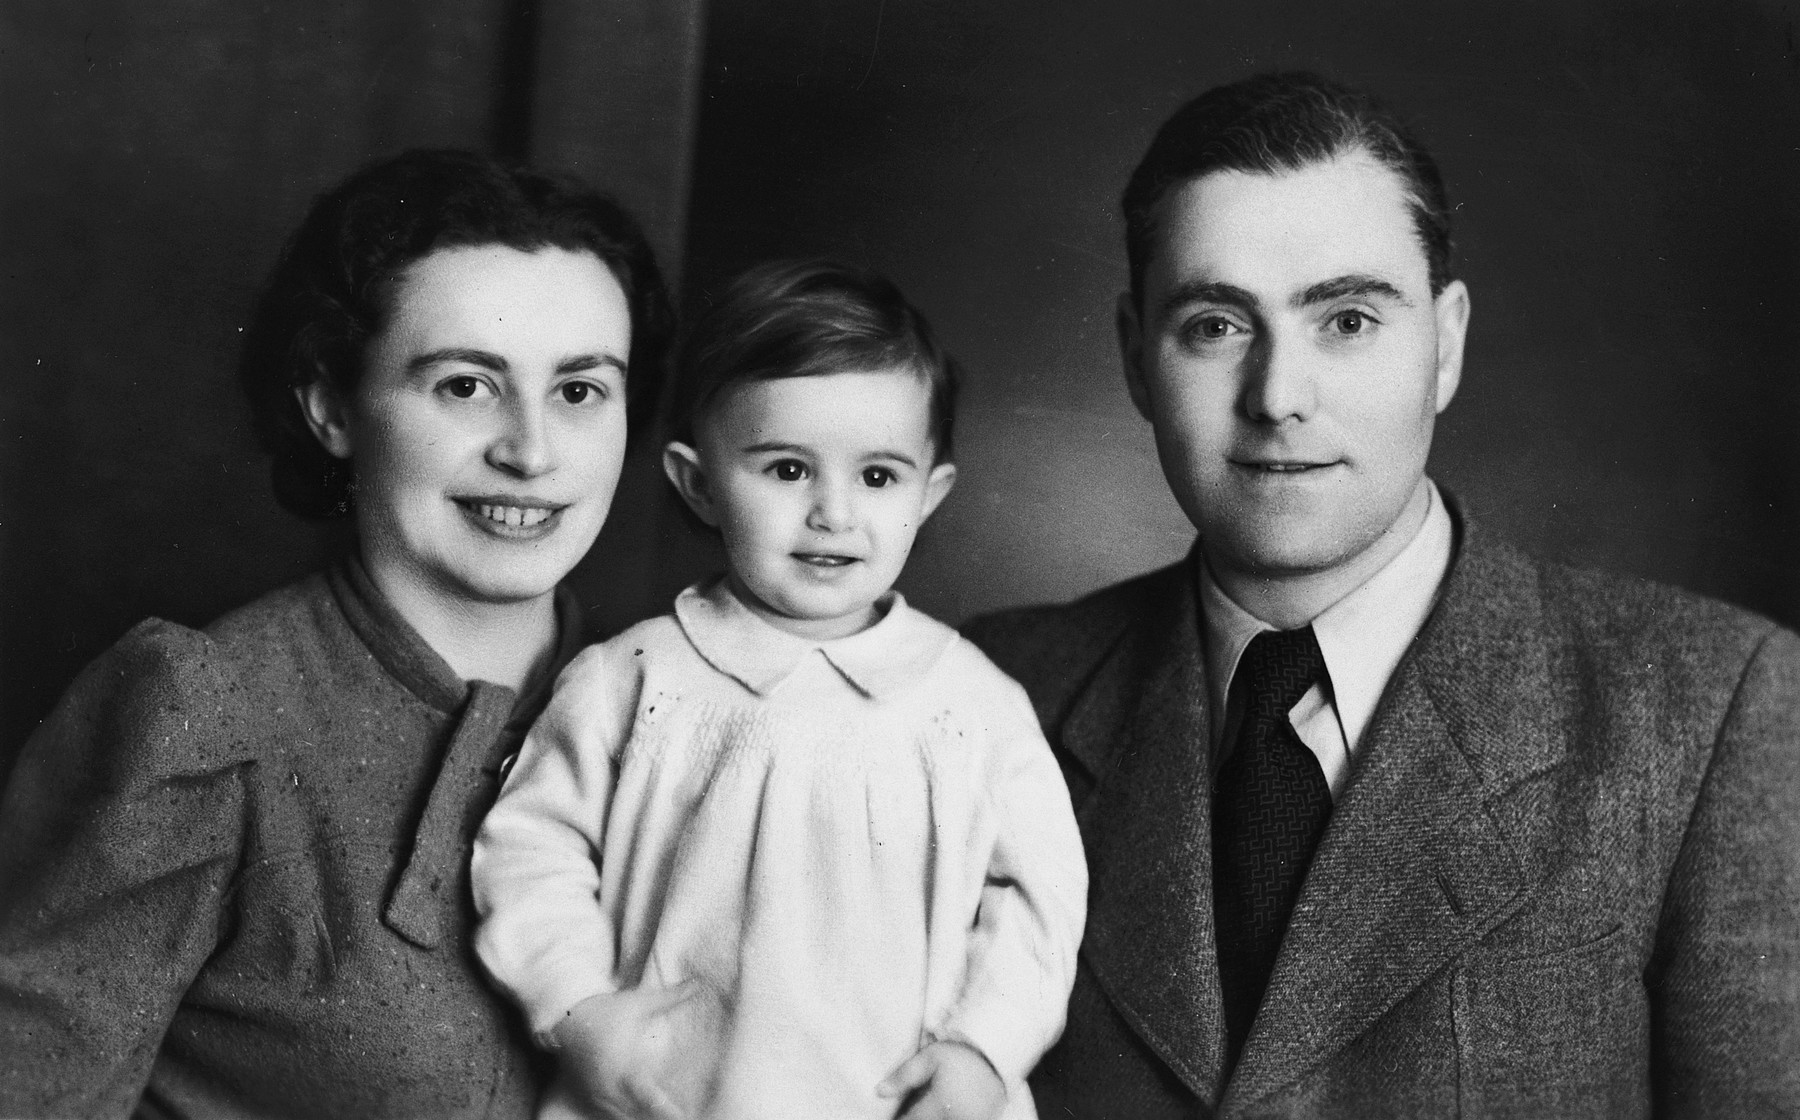 Studio portrait of an Austrian-Jewish couple and their young daughter.

Pictured are Ernst, Paul and Lisl Porges.